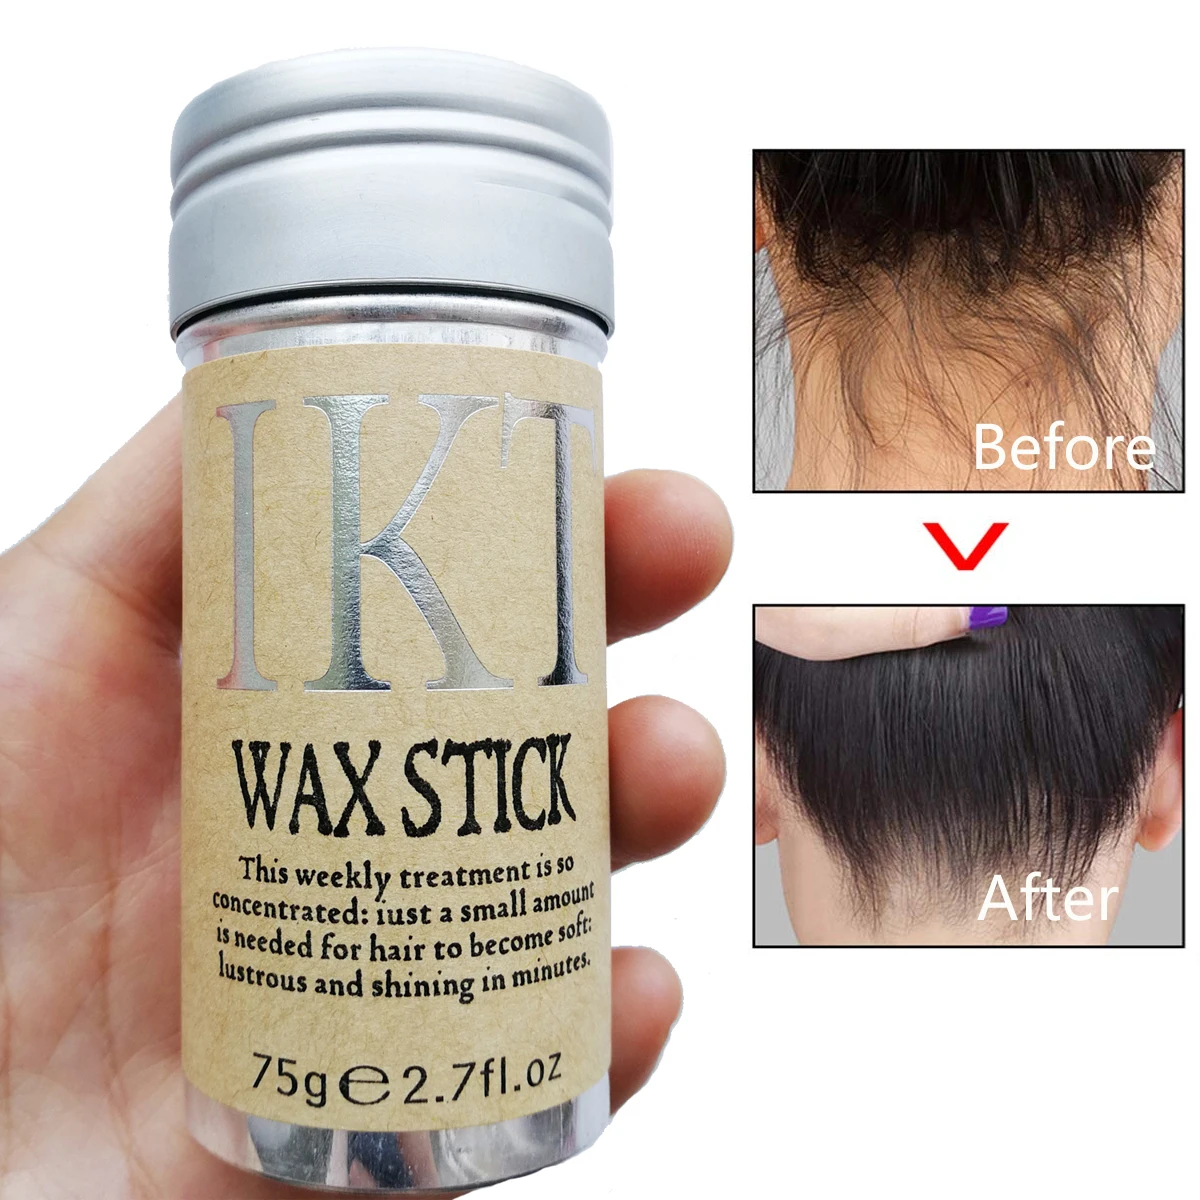 

1PCS Hair Wax Stick For Human Wigs Edge Control Slick Stick Bulk Fly Away Edge Hair Frizz Unisex Pomade Non-Greasy Styling Wax